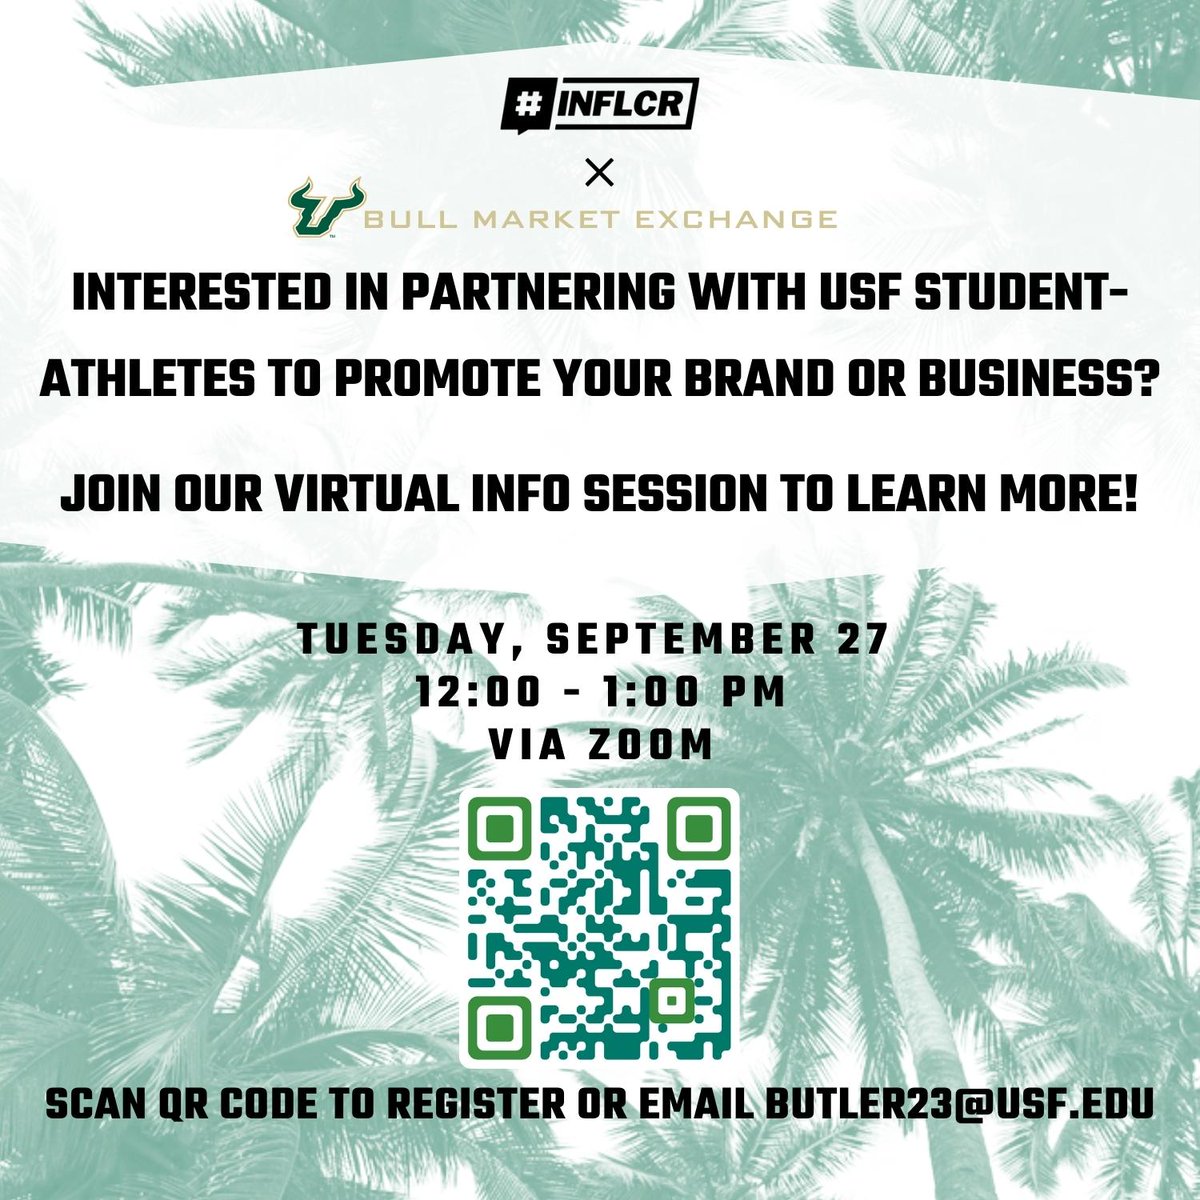 Support our Bulls! Local businesses, you’re invited to attend a virtual information session with our partner @INFLCR this coming Tuesday. Learn more about how you can work with USF student-athletes to promote your brand or business. #HornsUp 🤘